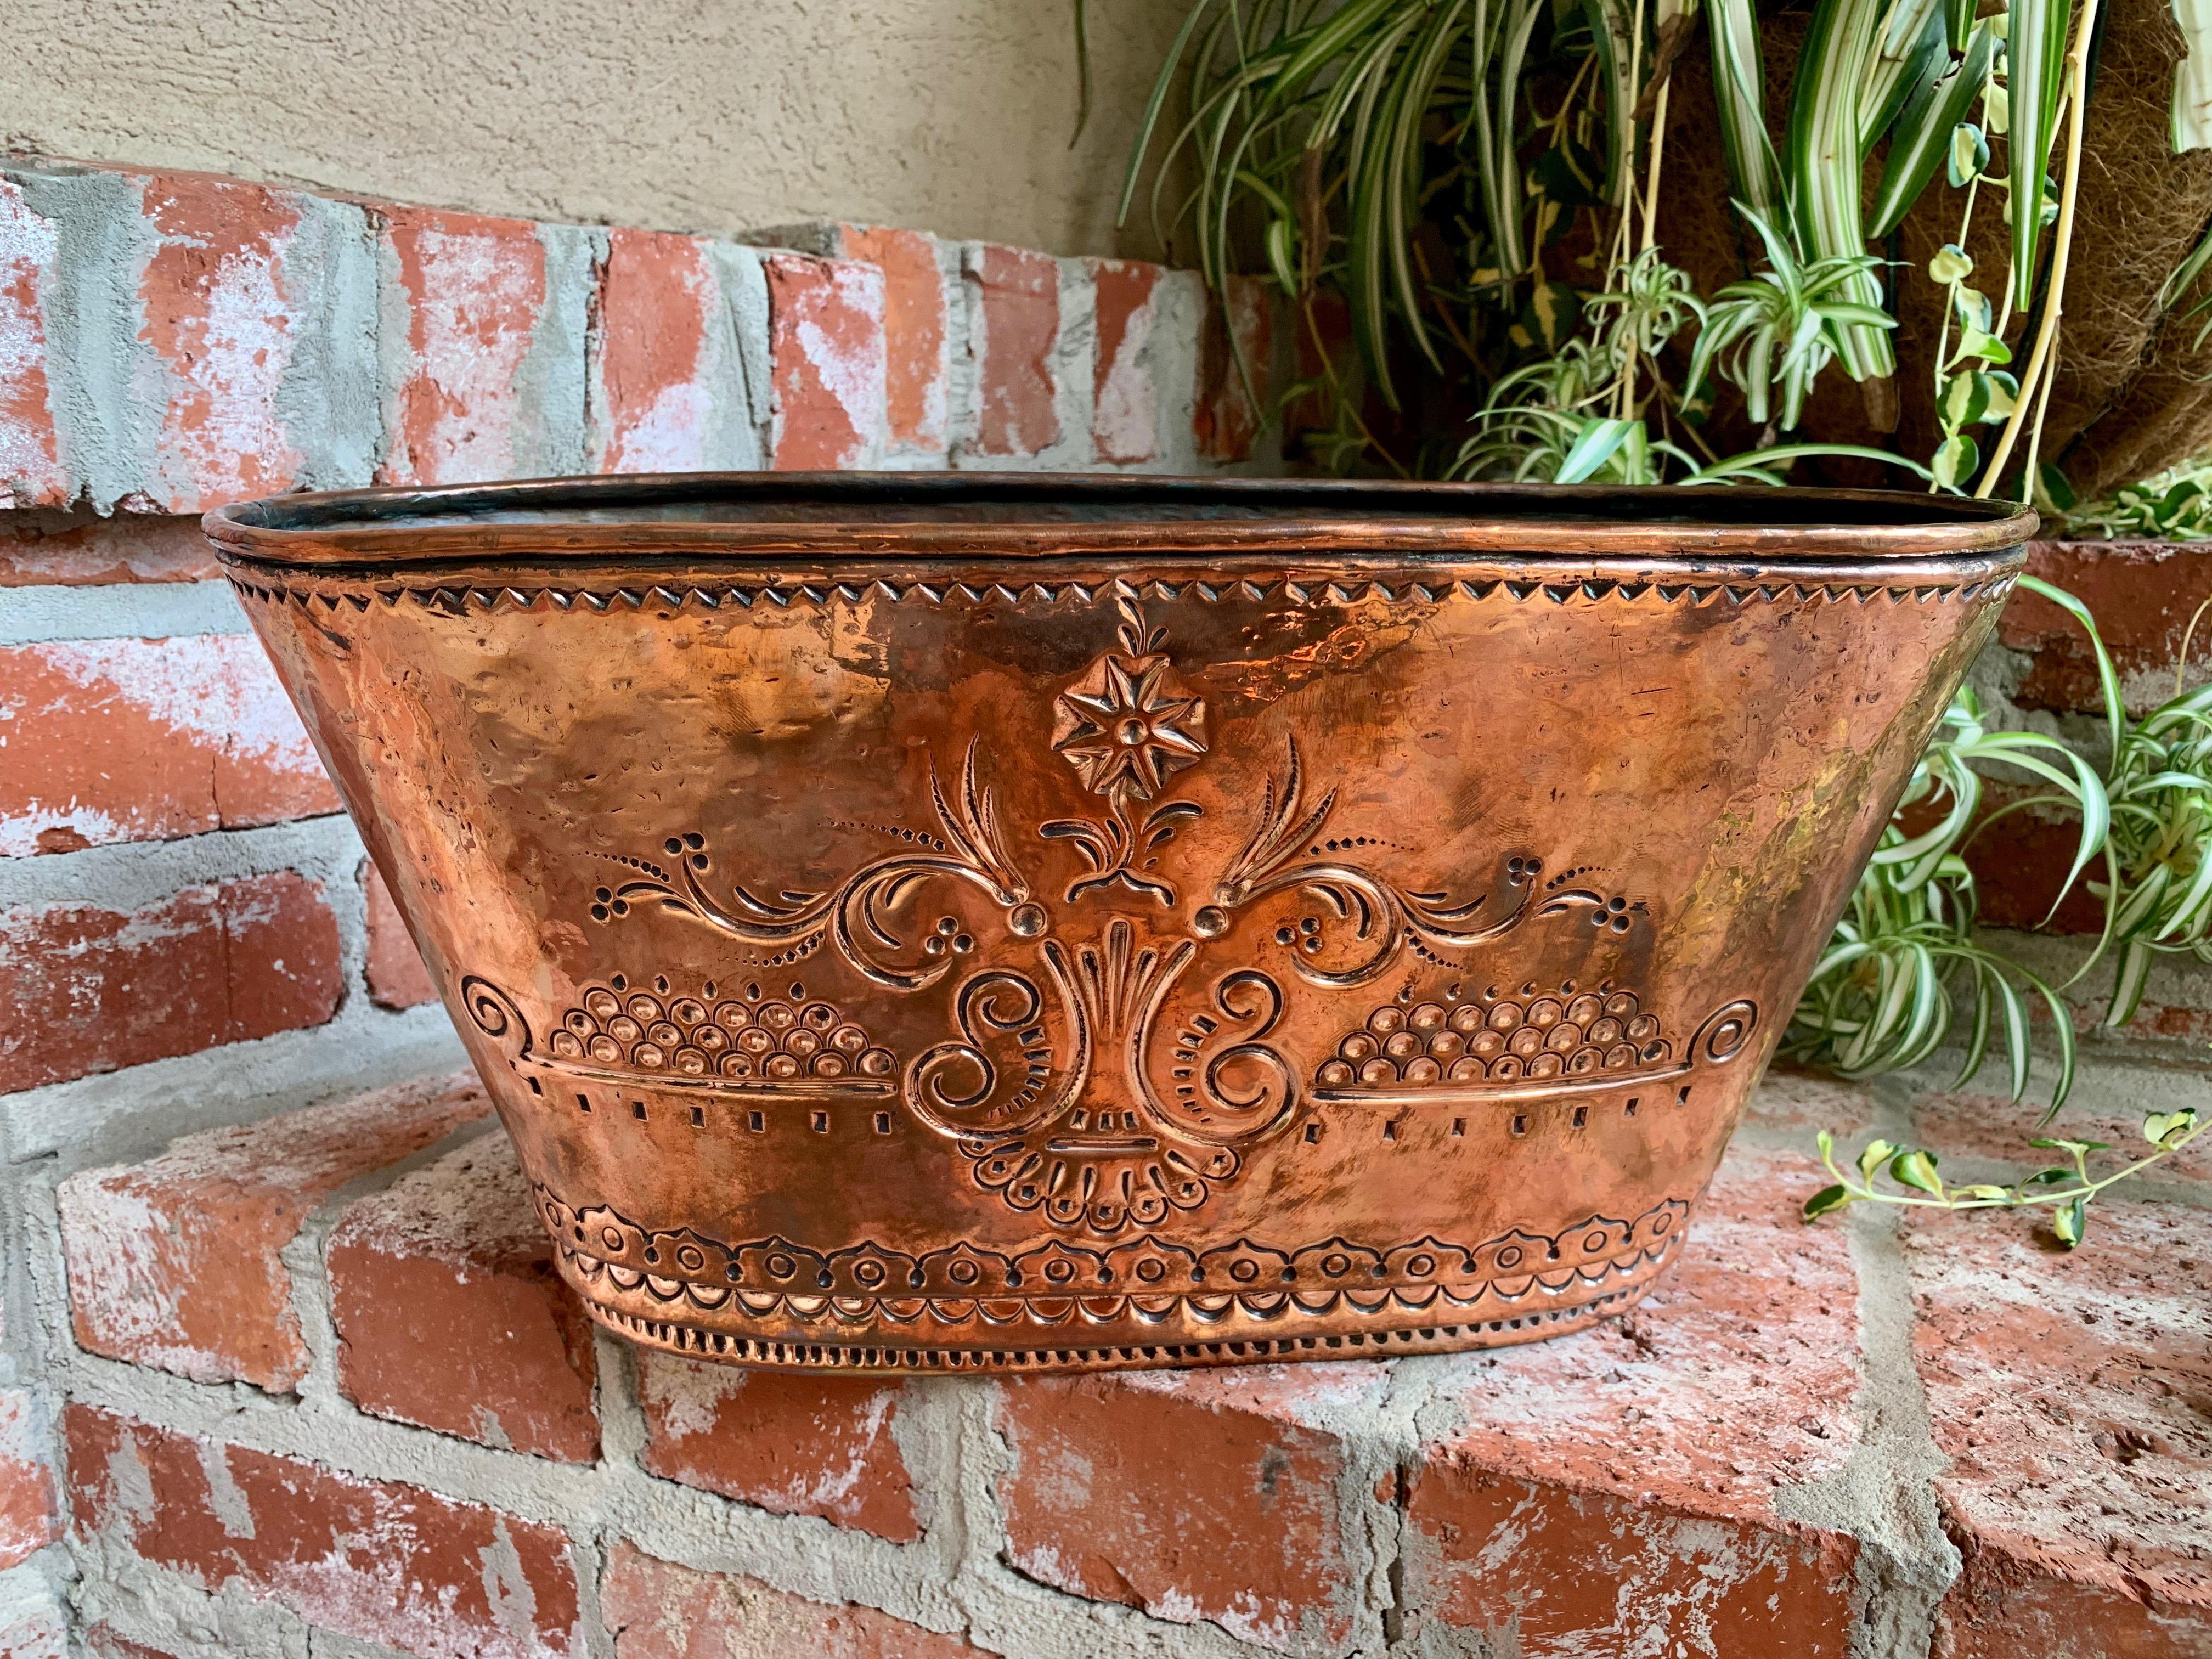 Antique French copper embossed planter jardinière cachepot oval wine bucket

~Direct from France~ 
~Beautiful antique French hammered copper Jardinière/planter, versatile for many uses, from kitchen décor, to planter, to champagne/wine bucket!~